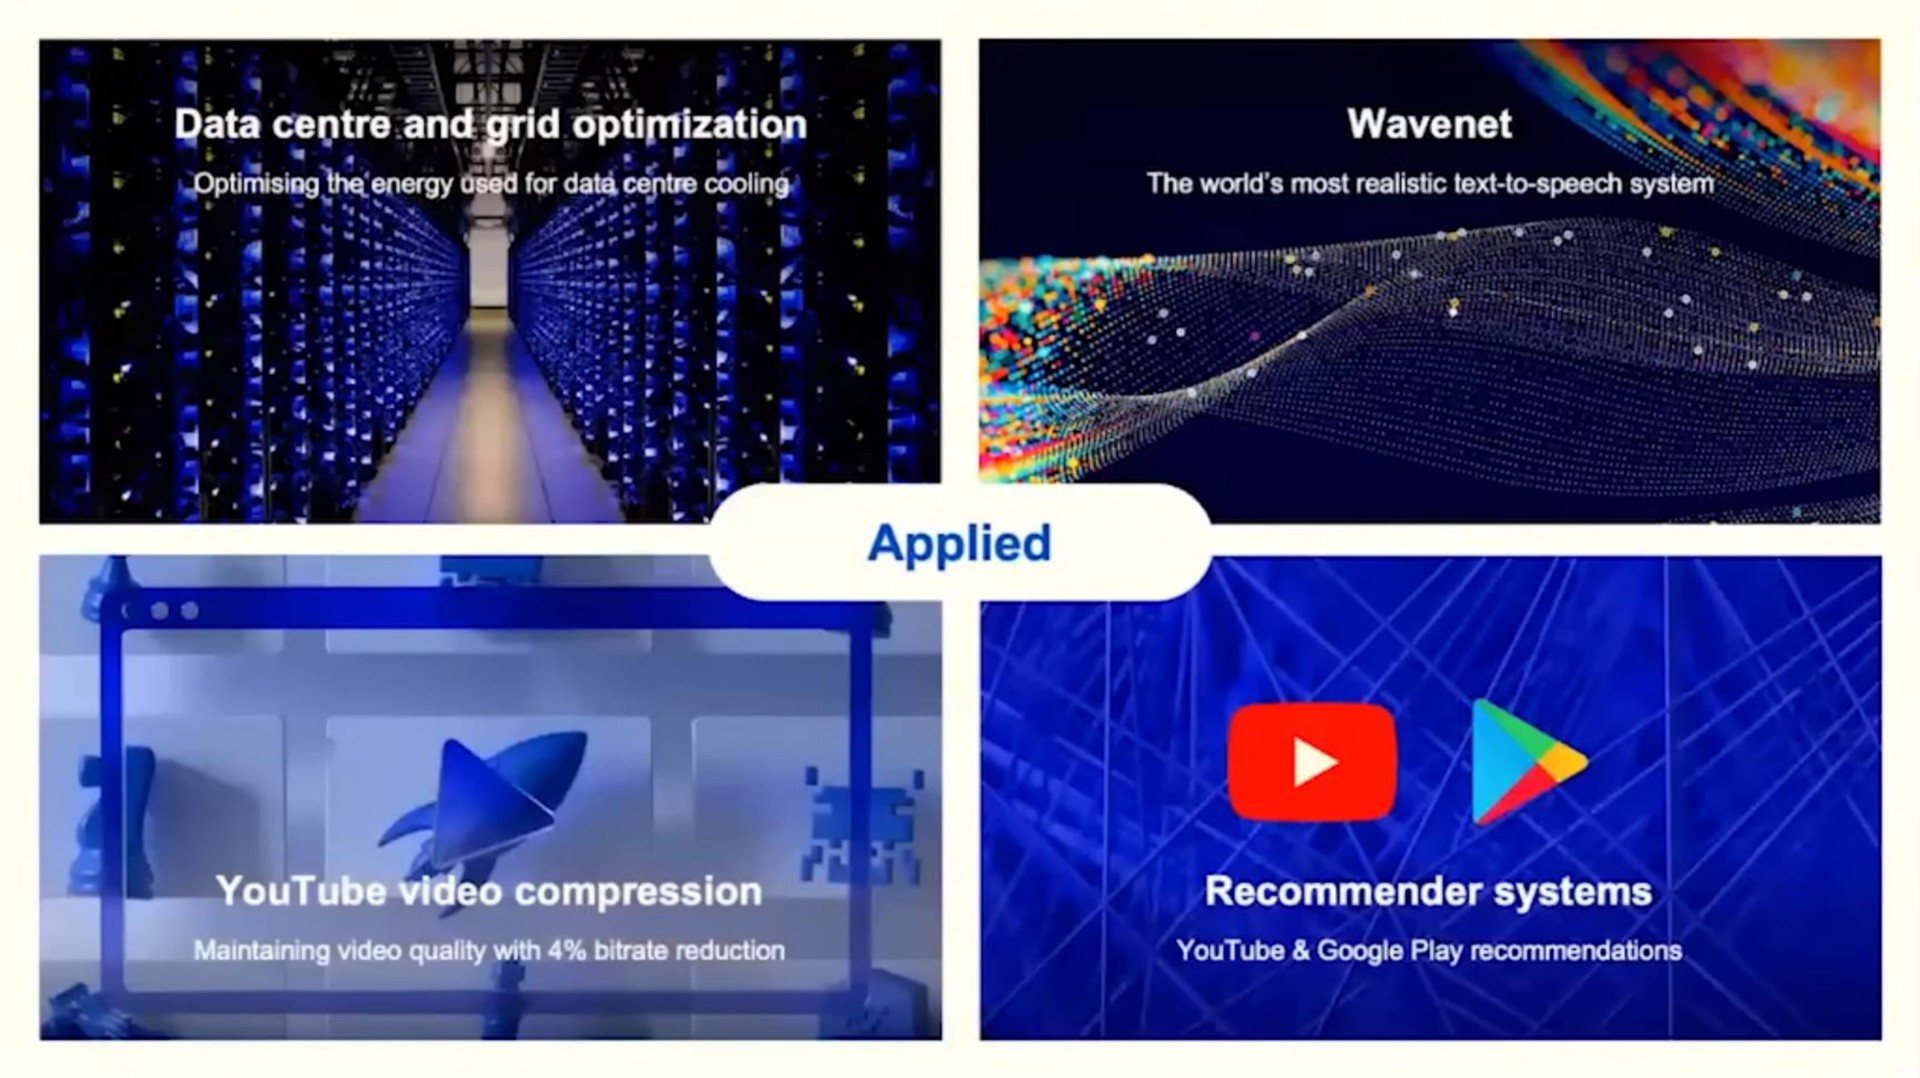 data optimization for data the world most realistic text to speech system play recommendations recommender systems | DeepMind